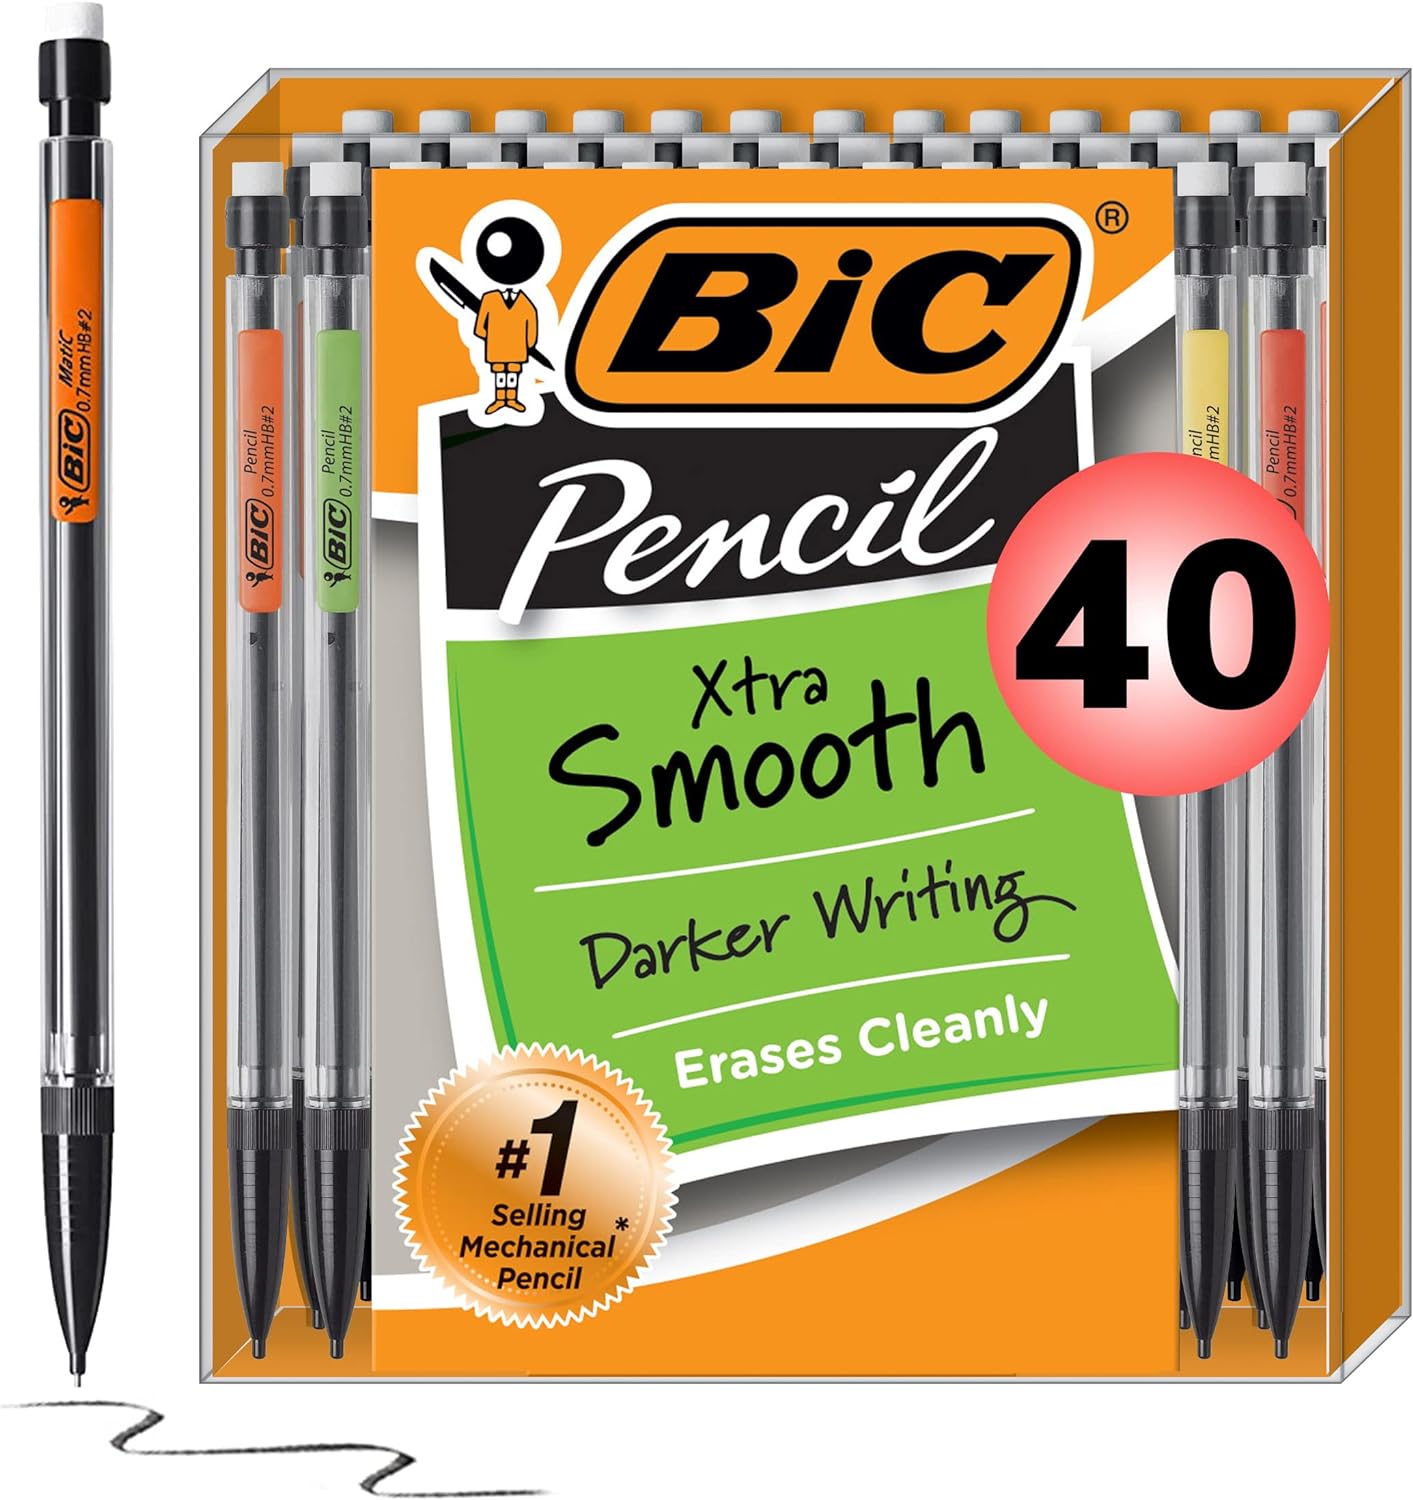 Amazon.com : BIC Xtra-Smooth Mechanical Pencil, Medium Point (0.7mm), Perfect For The Classroom & Test Time, 40-Count : Office Products $6.00